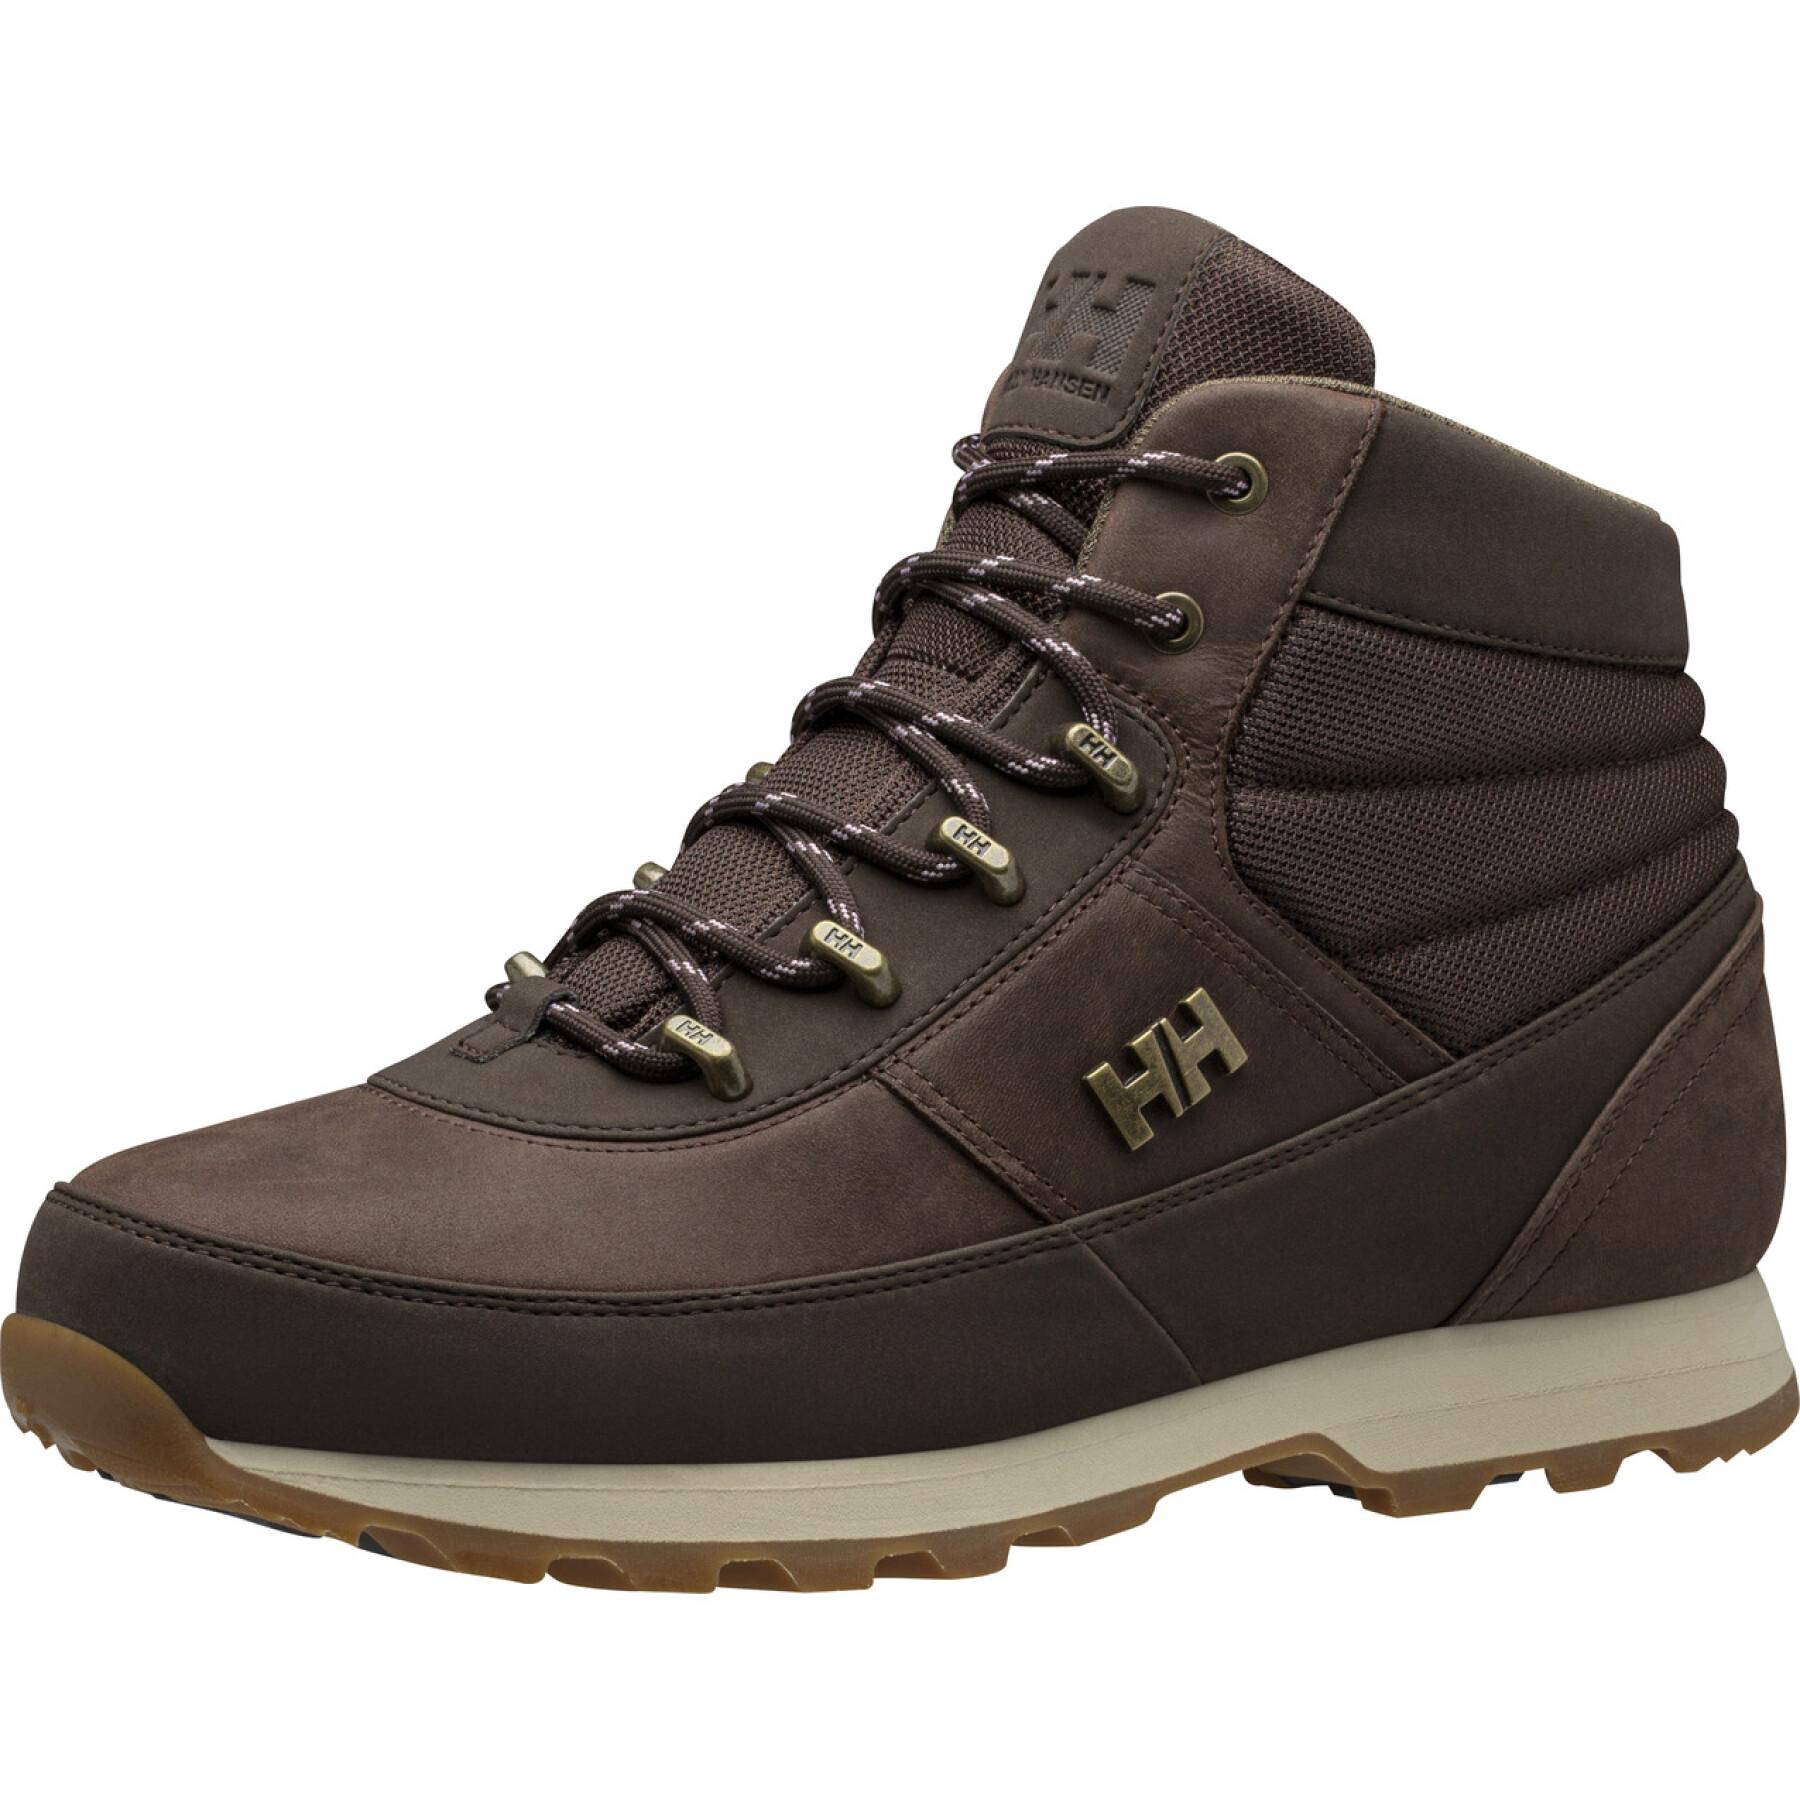 Hiking shoes Helly Hansen woodlands